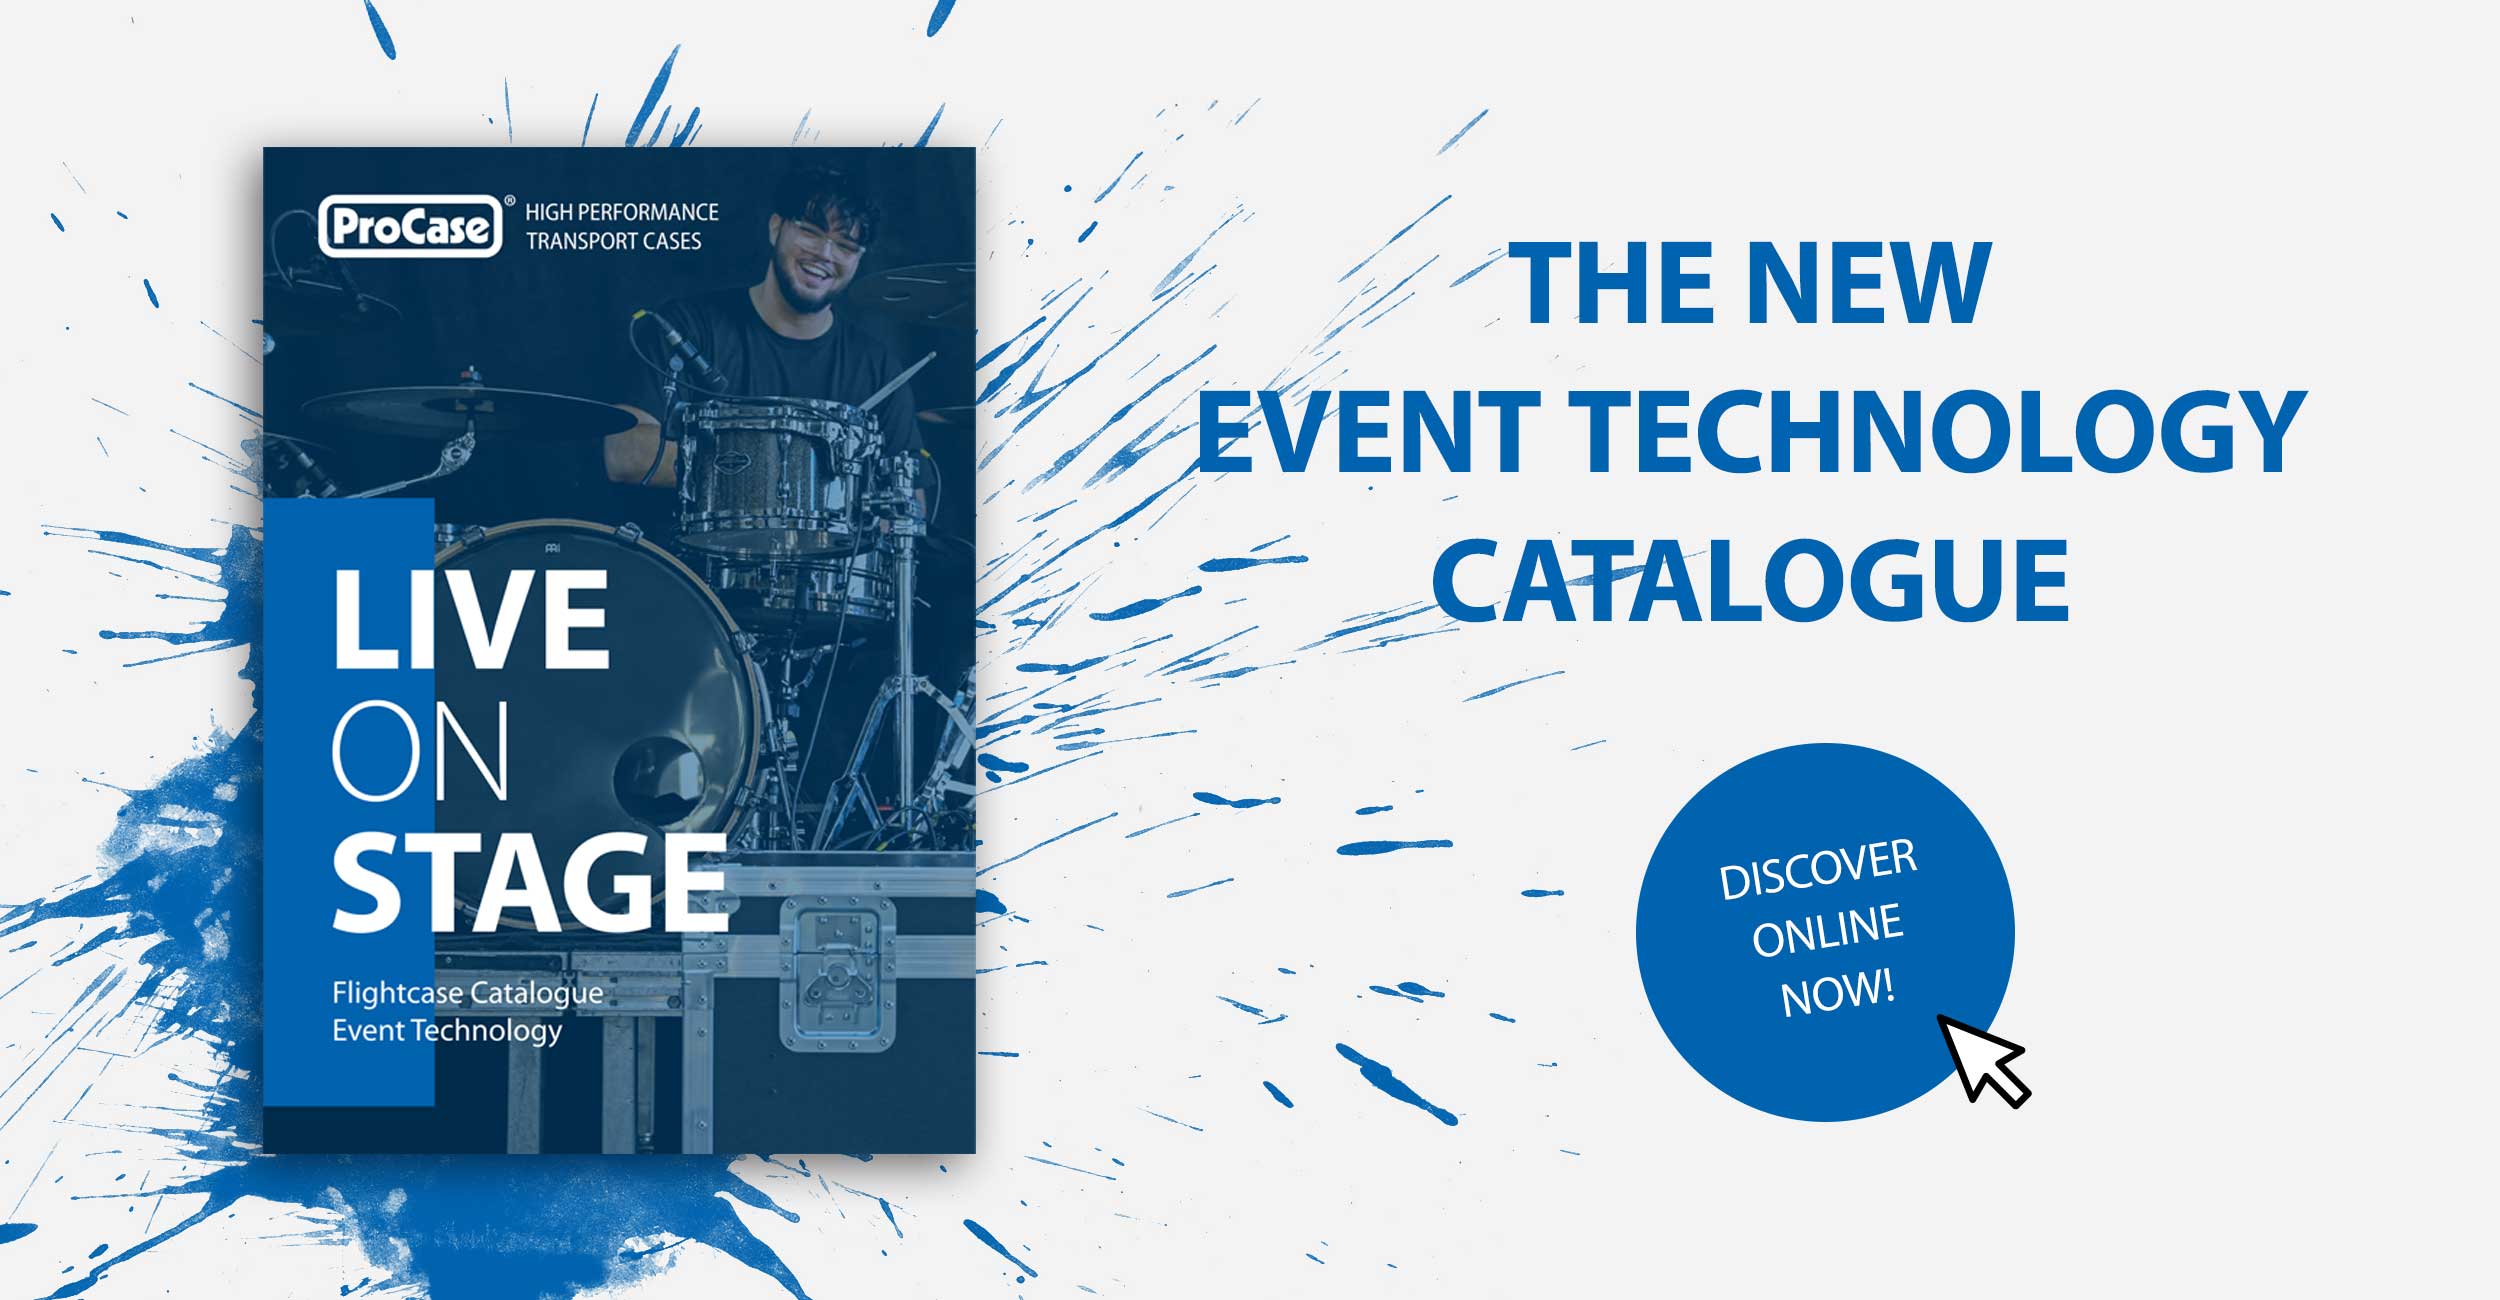 Discover the new event technology flightcase catalogue!